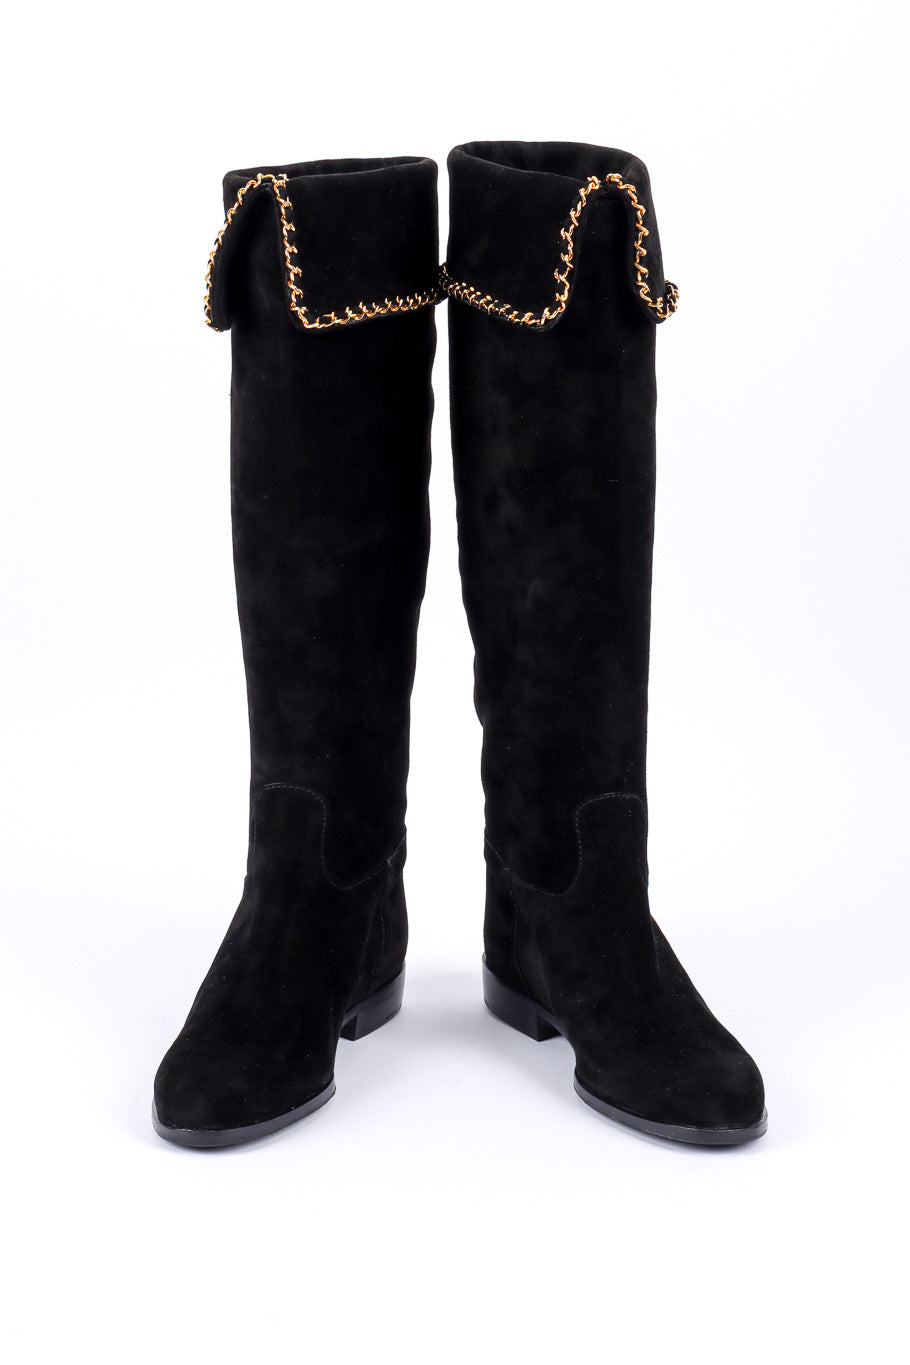 Vintage Chanel Chainlink and Suede Riding Boots front view @recessla